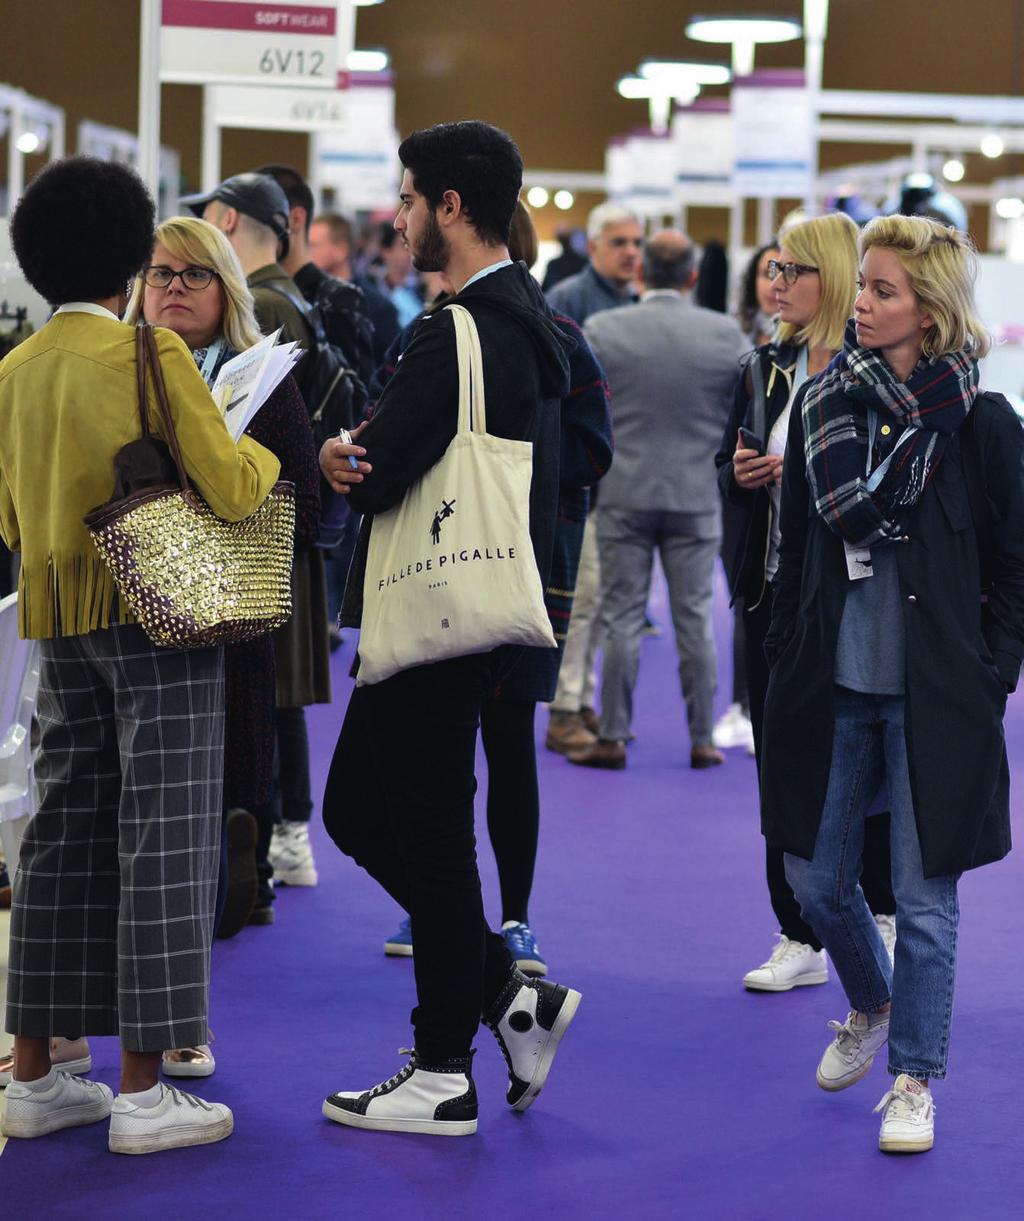 PREMIÈRE VISION MANUFACTURING TARGET VISITORS, an international target OVER 8,000 VISITORS OVER THE COURSE OF THE THREE-DAY SHOW 66%